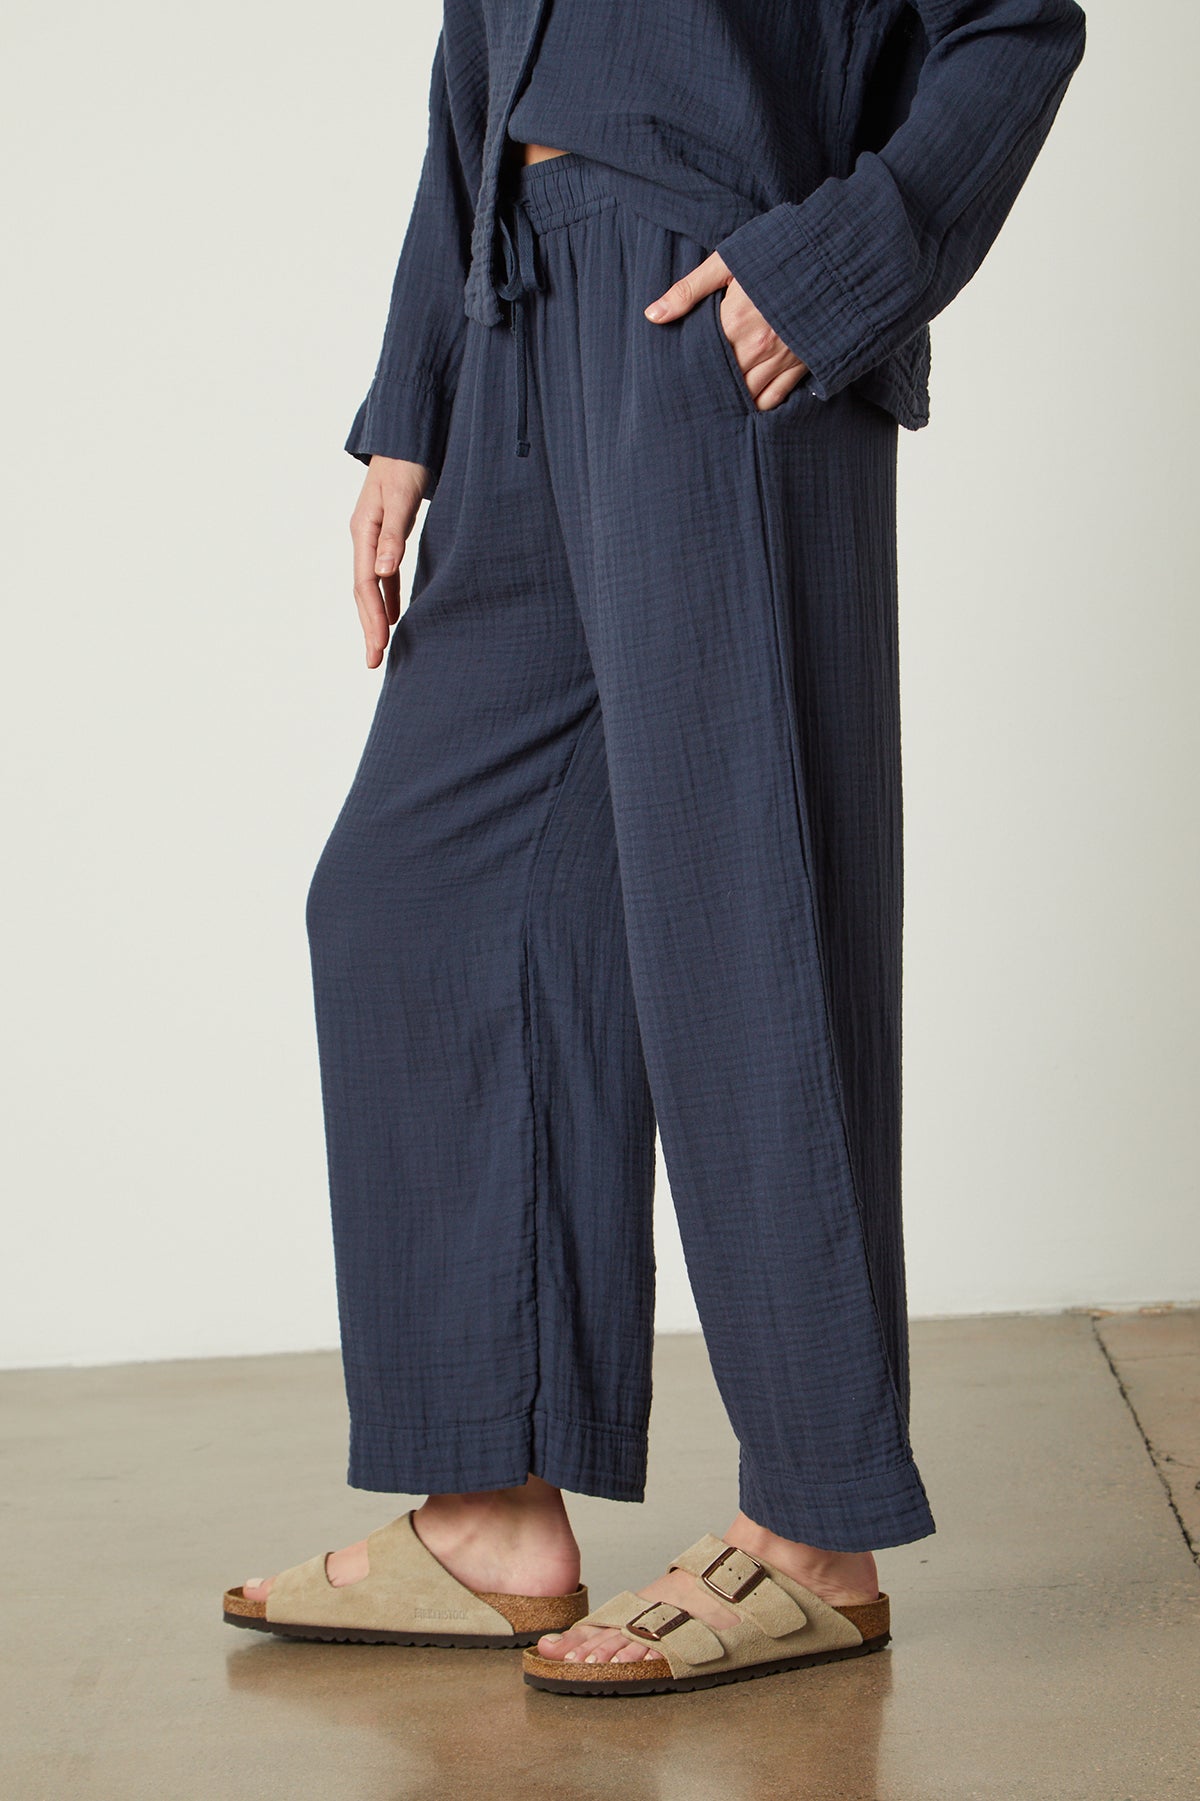   The model is wearing a navy wide leg PAJAMA PANT from Jenny Graham Home and sandals. 